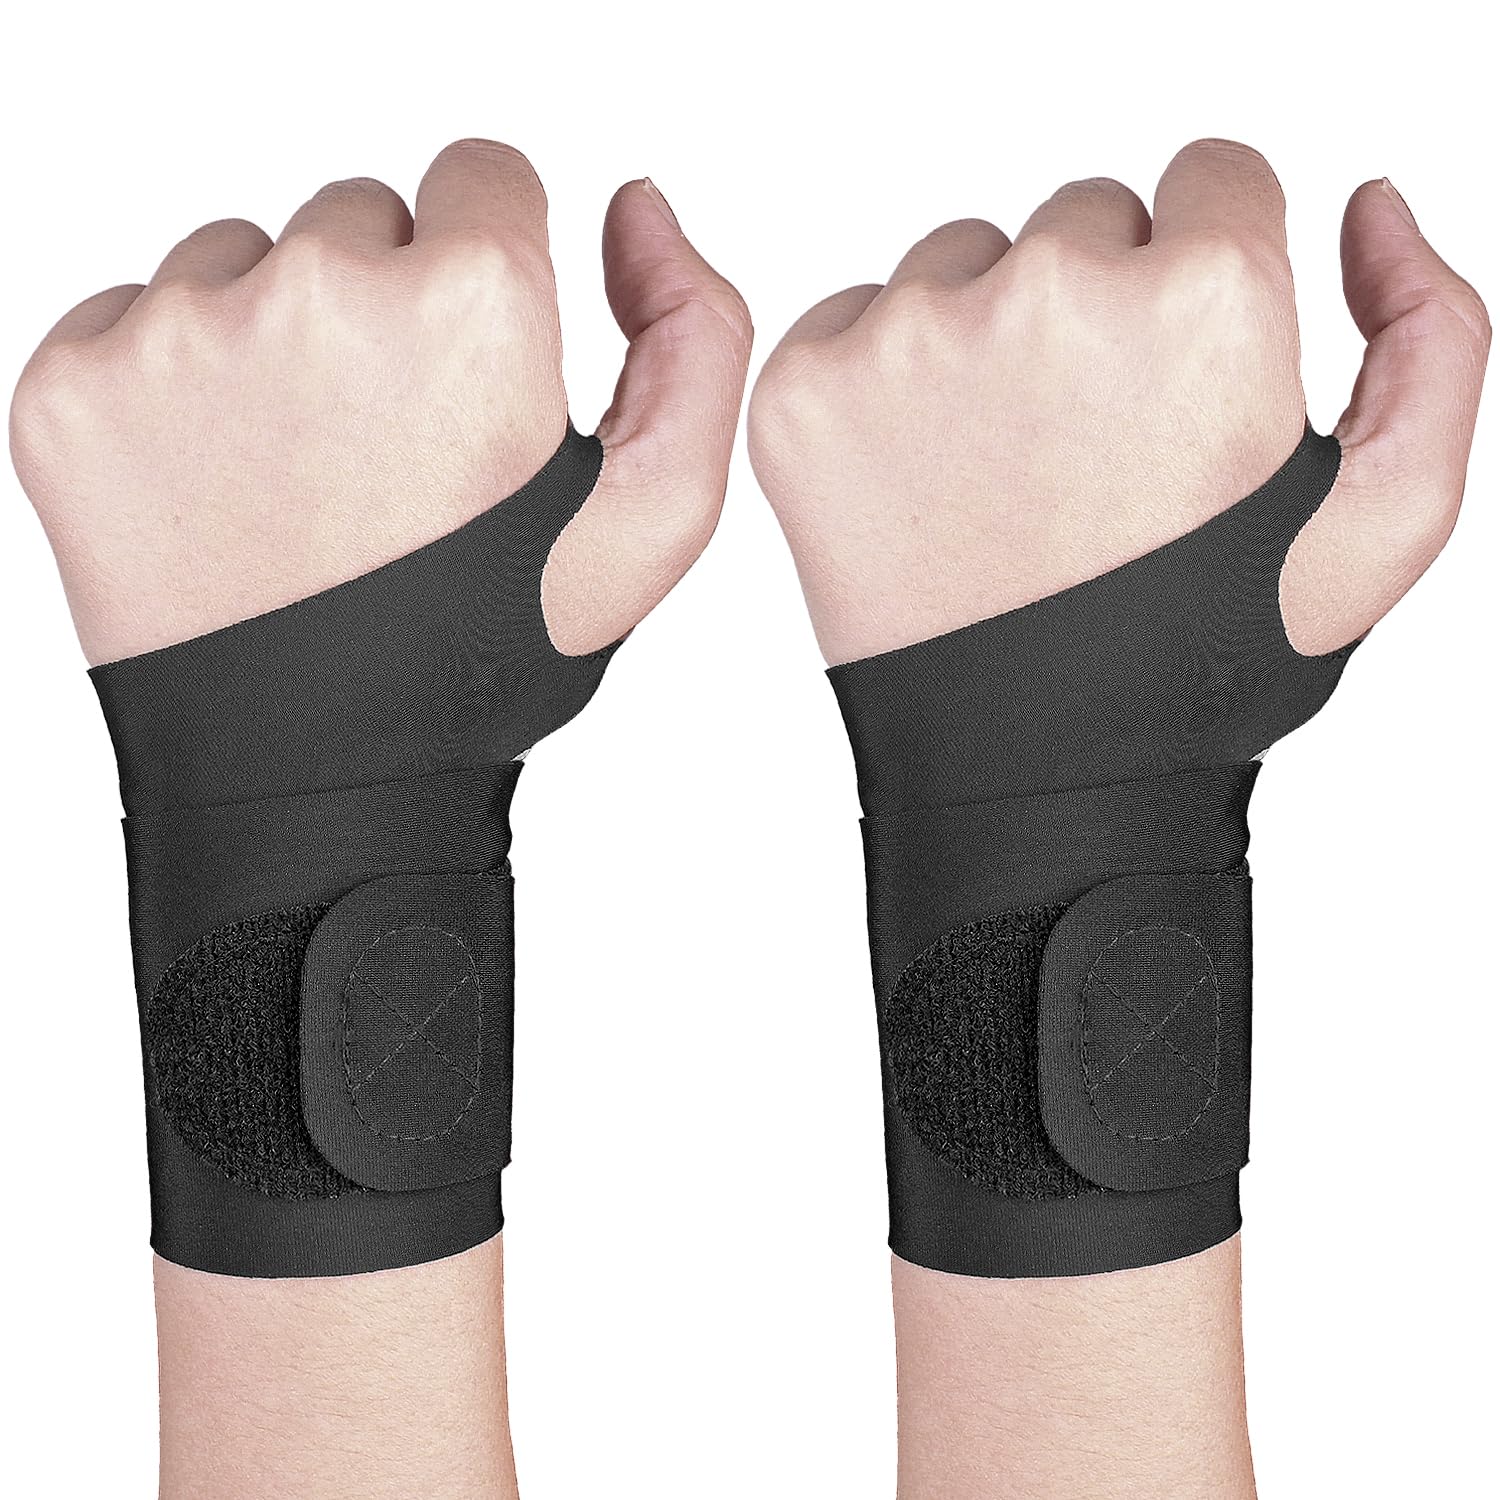 Thin Wrist Brace Support for Carpal Tunnel, Pain Relief, Arthritis, Tendonitis, Elastic Wrist Wraps Right and Left Hands - Compression and Support for Fitness